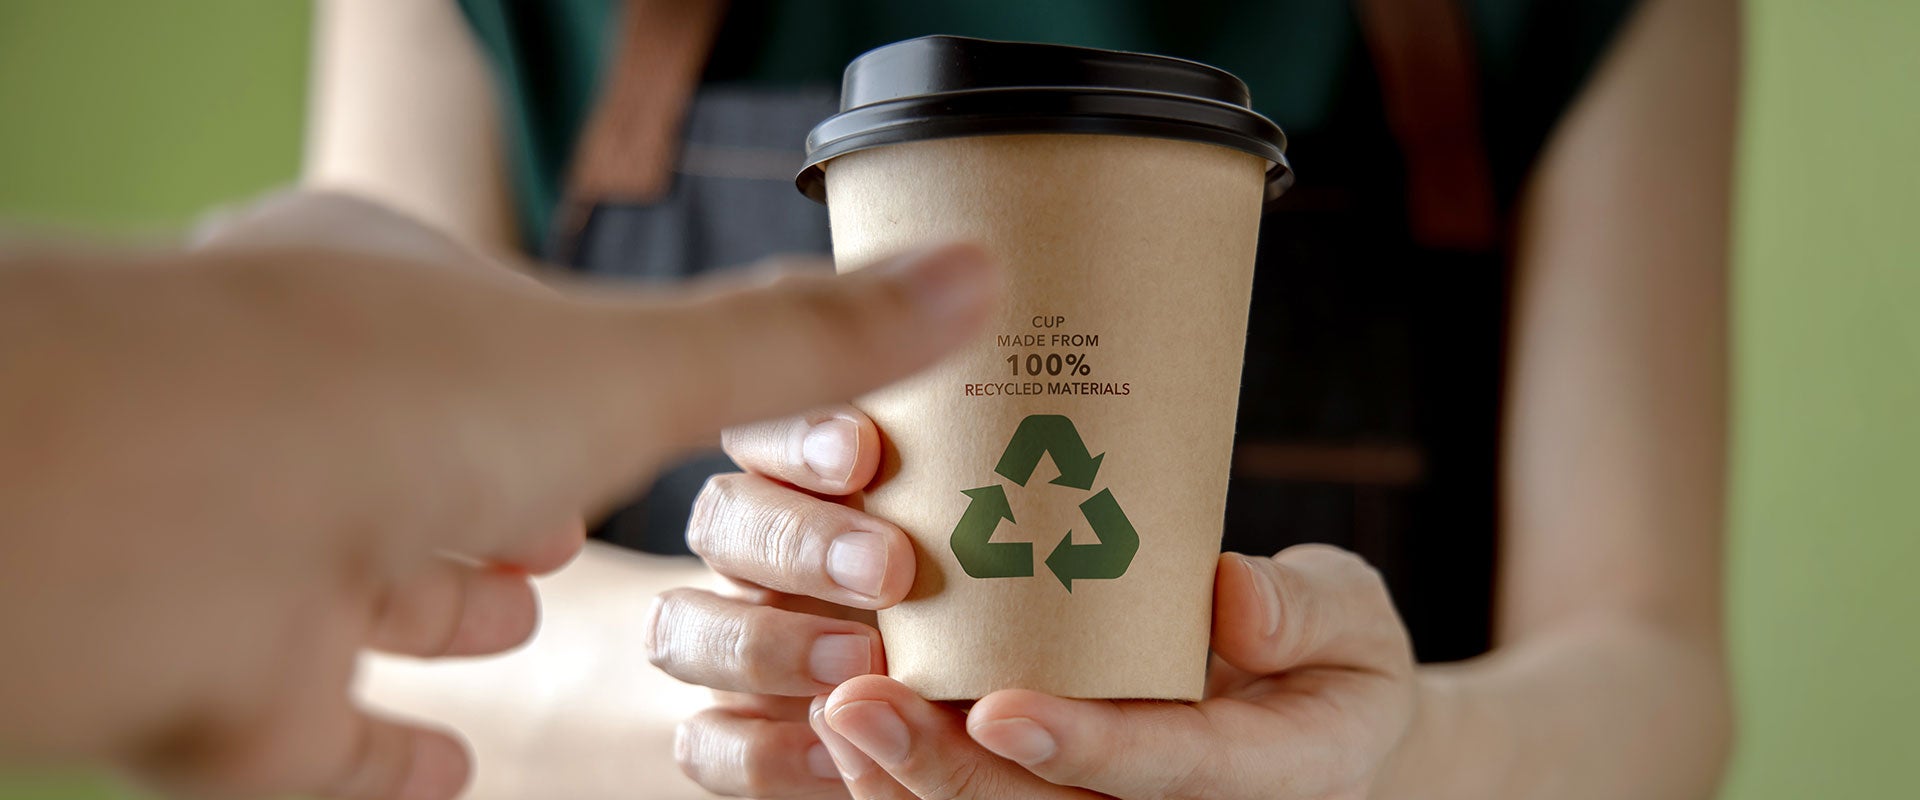 people holding recyclable coffee cup